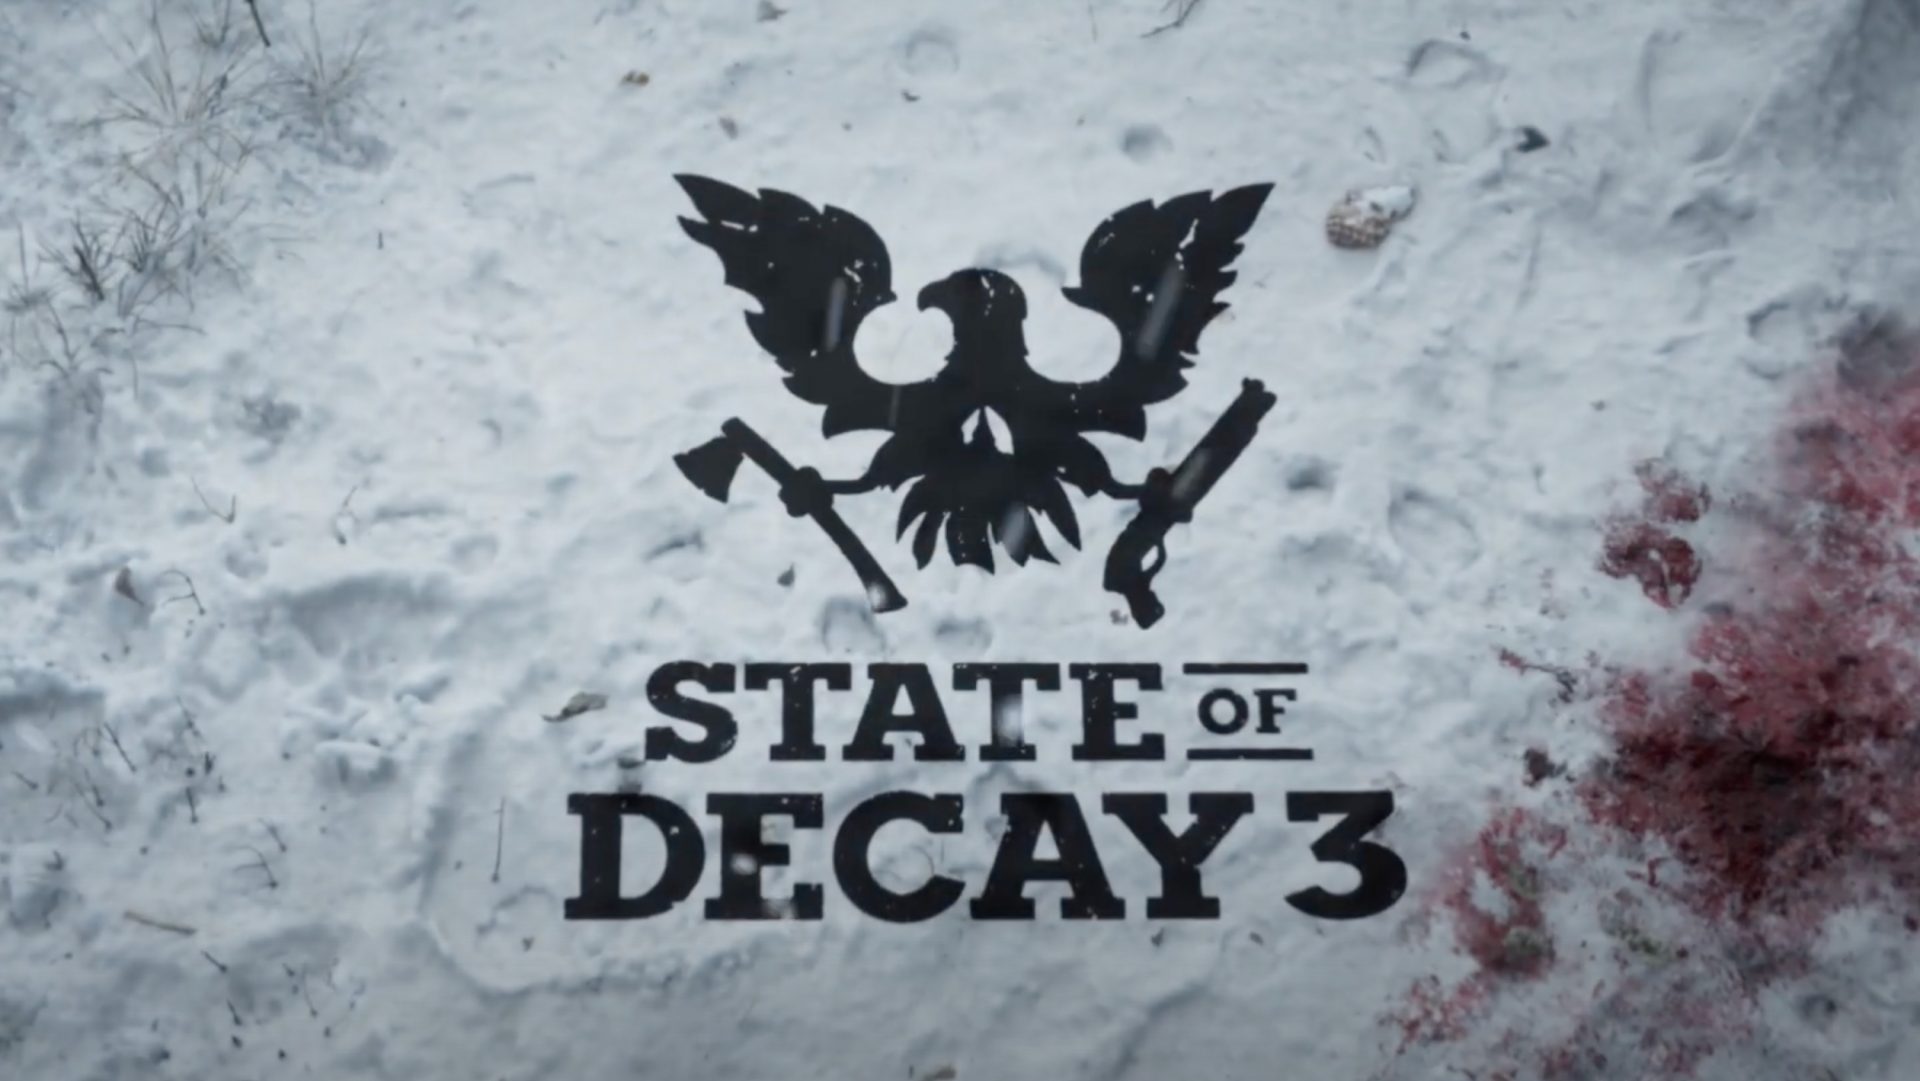 Klobrille on X: Matt: We want State of Decay 3 to compete